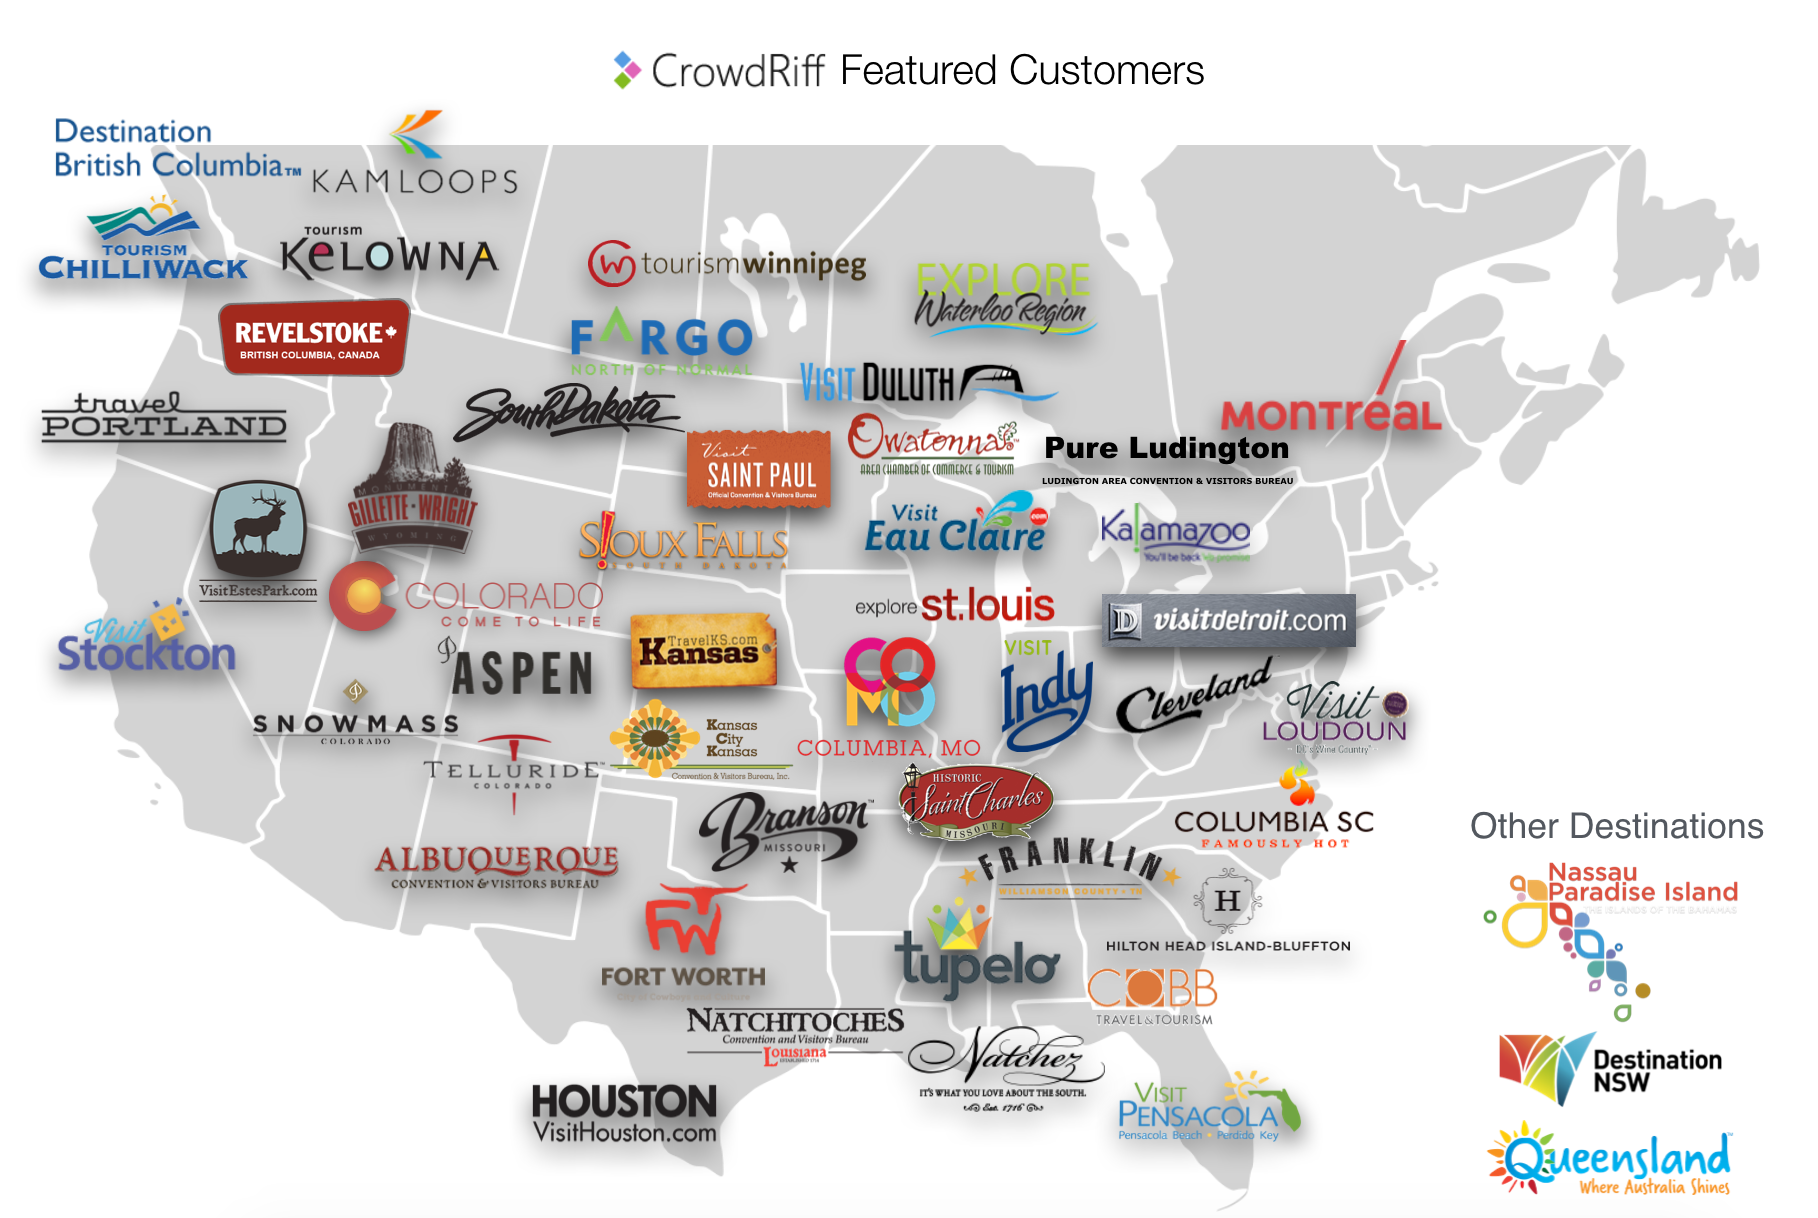 CrowdRiff Featured Customers Map